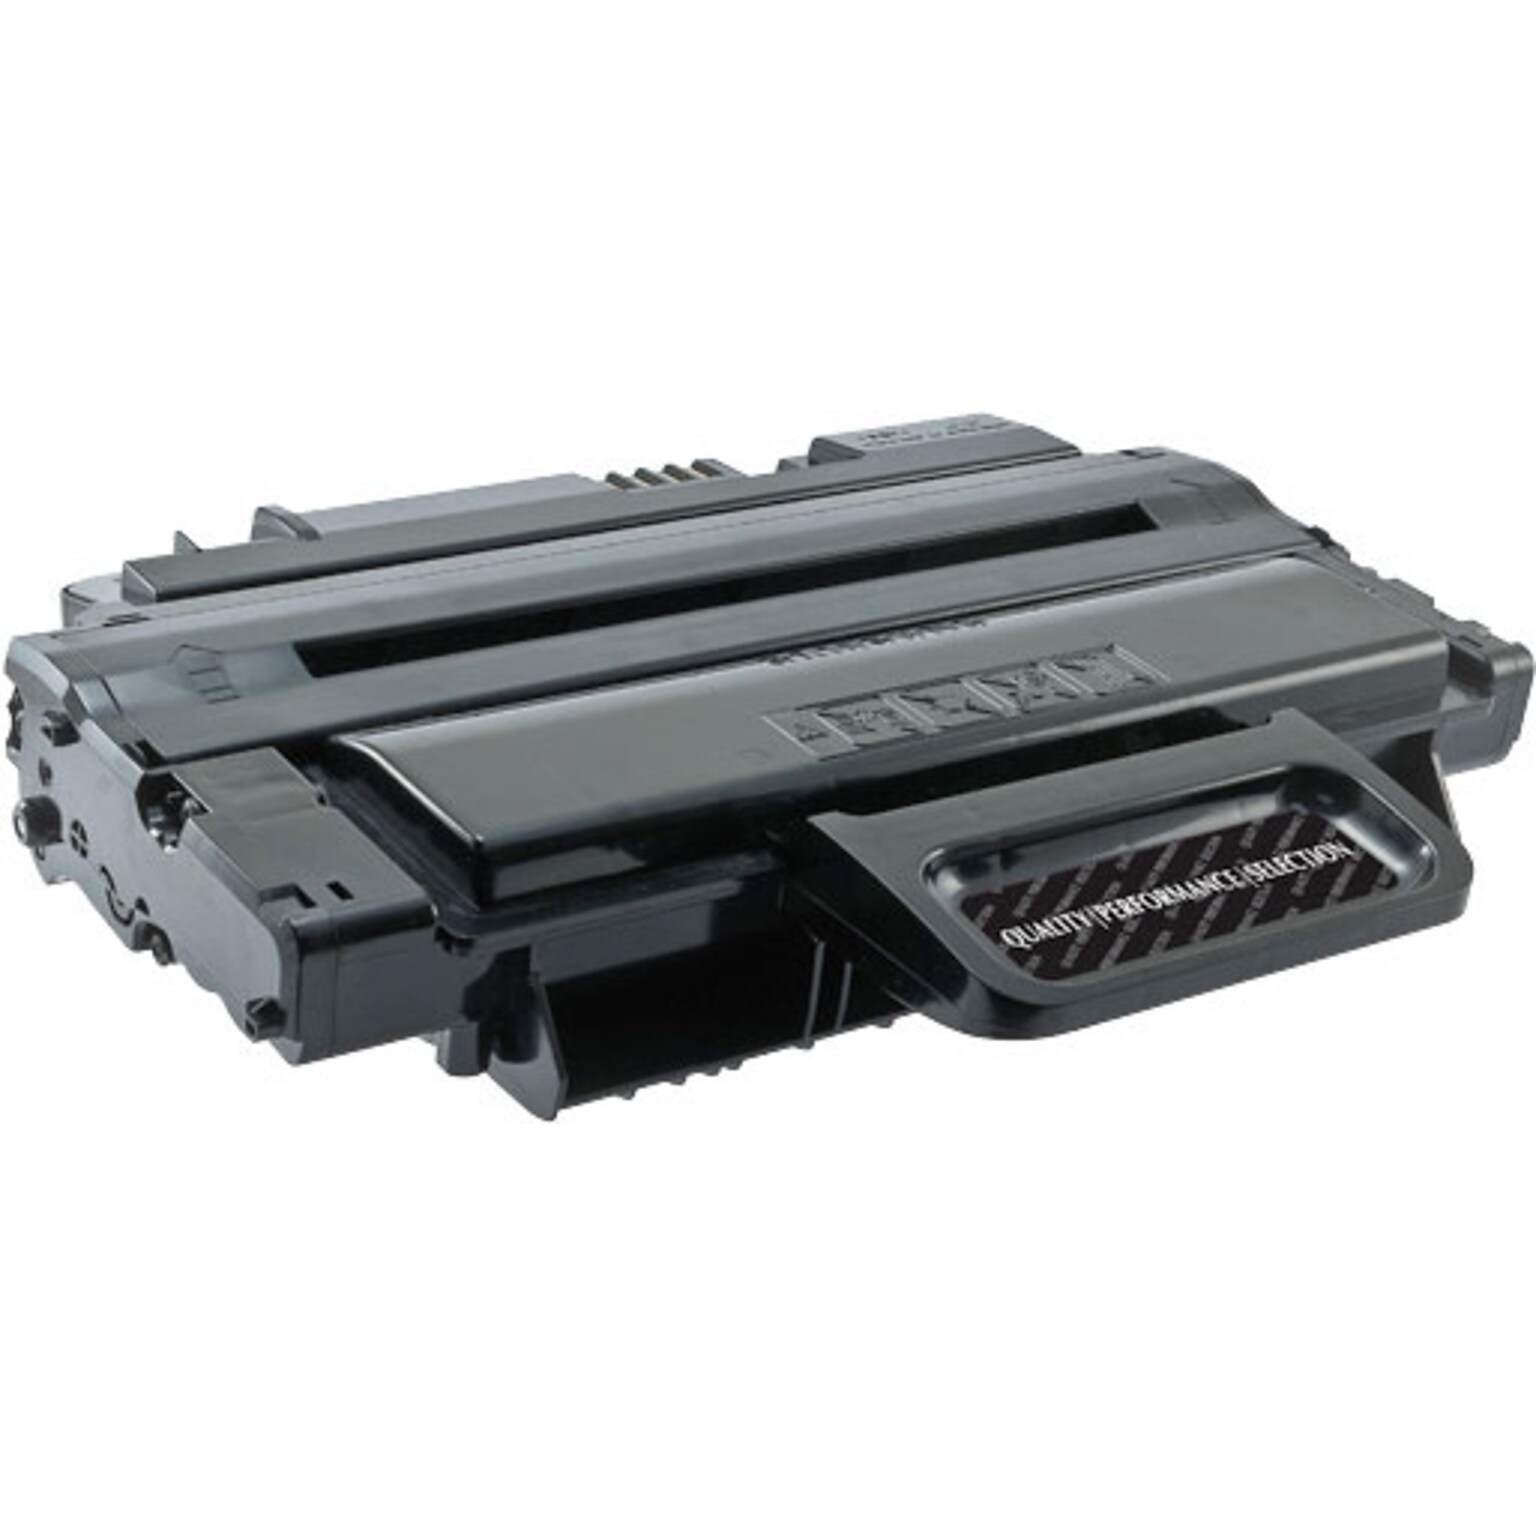 Quill Brand® Remanufactured Black High Yield Toner Cartridge Replacement for Xerox 3210/3220 (106R01485/106R01486)